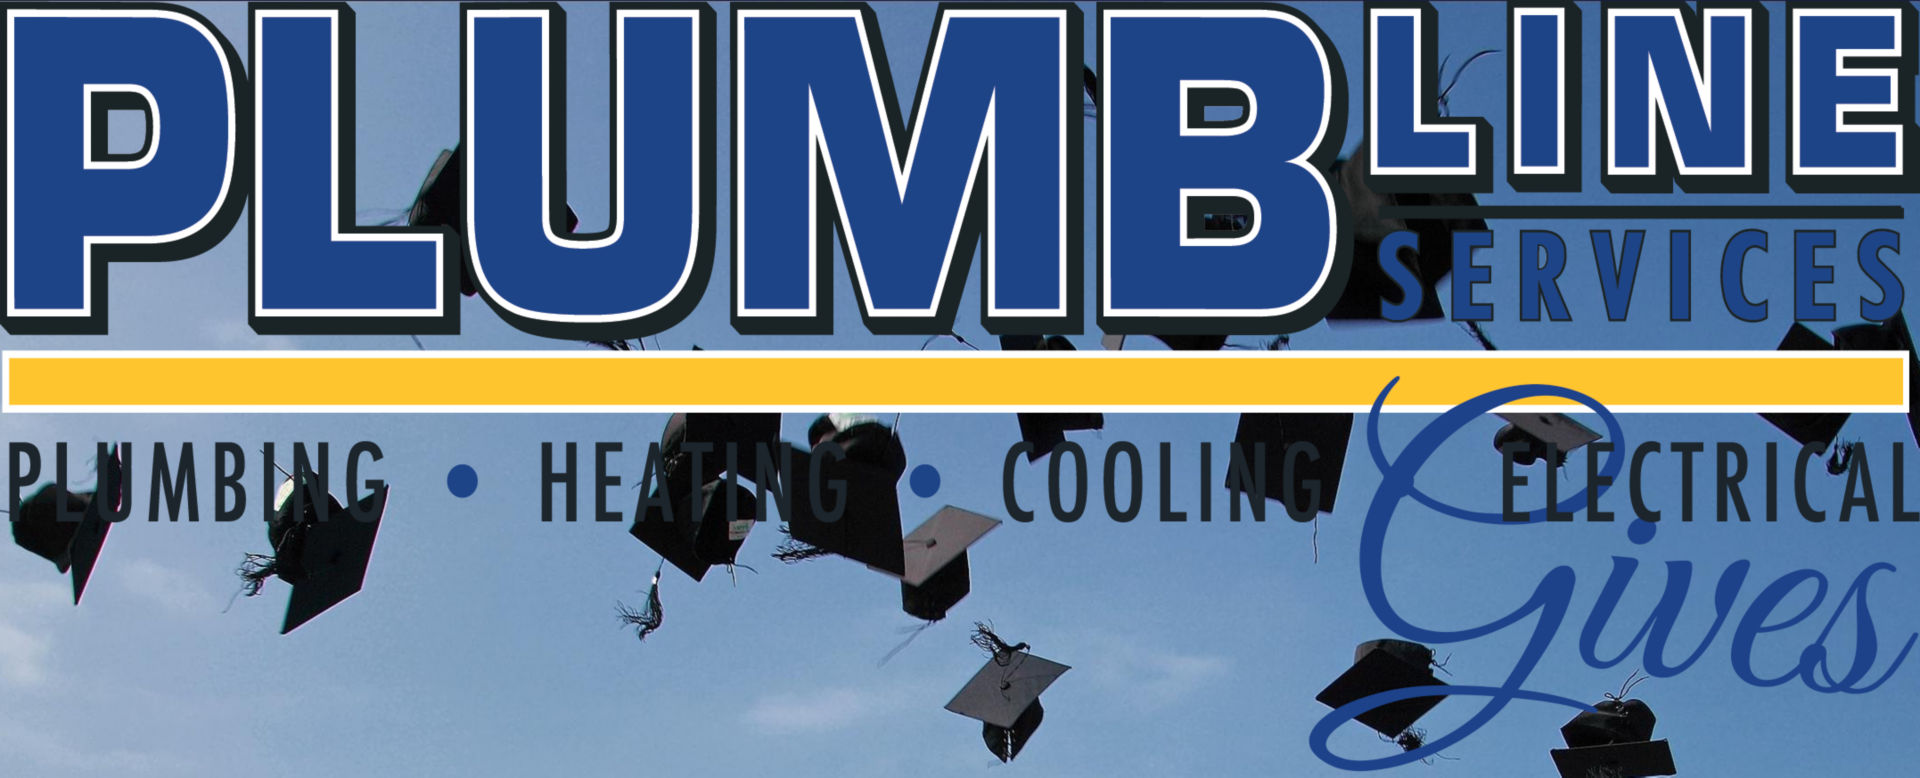 Plumbline Services Gives Scholarships